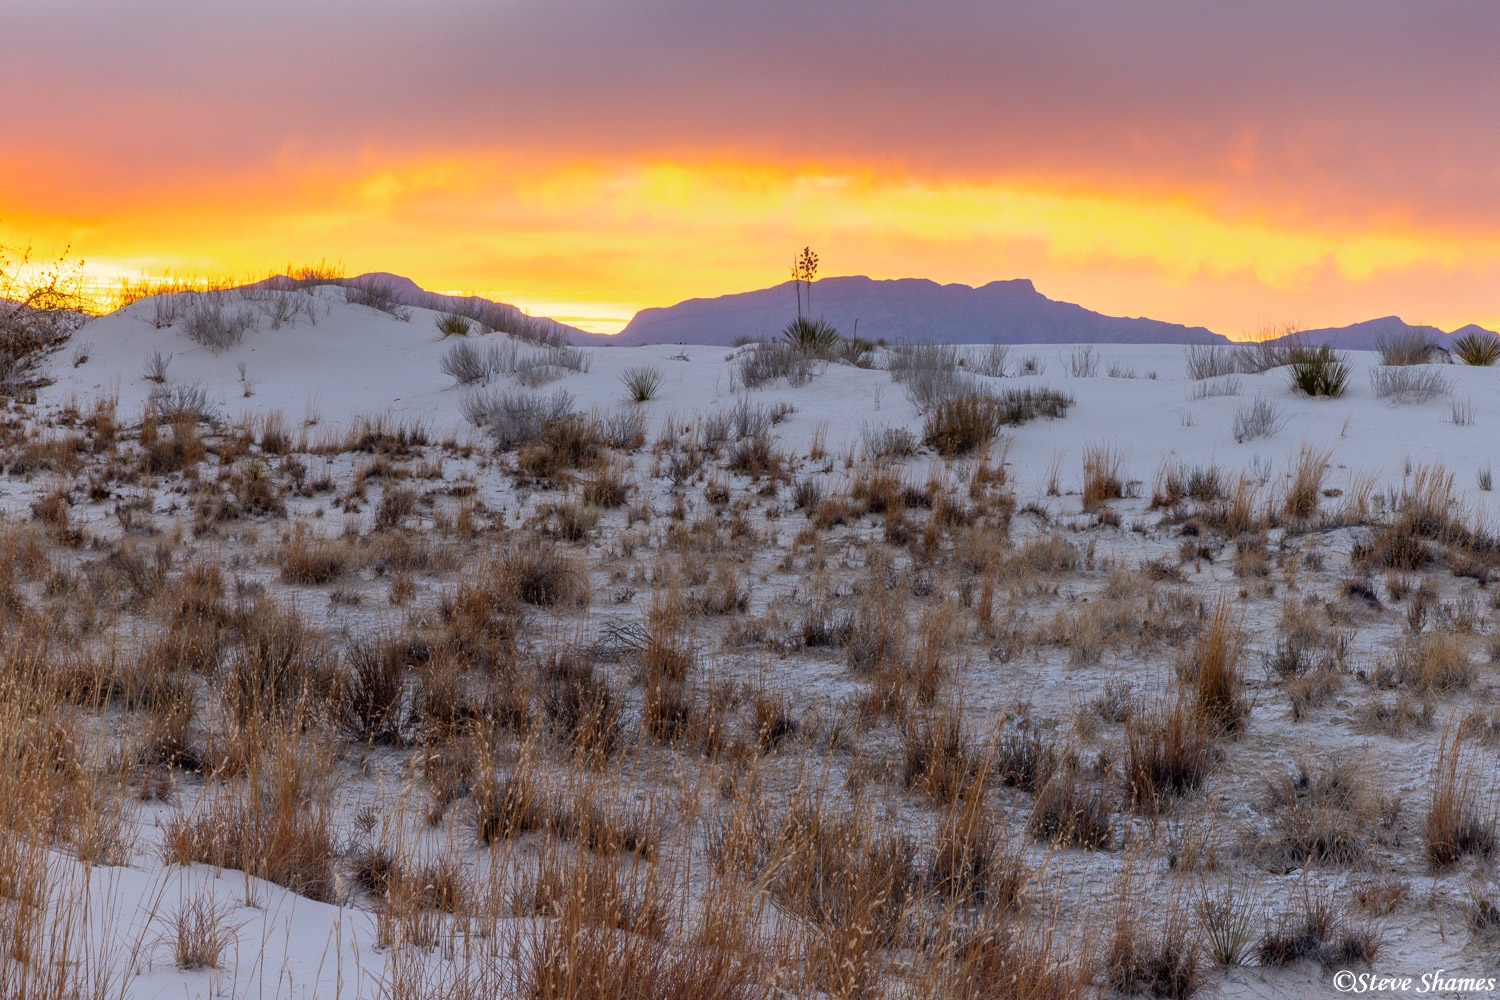 We were treated to a vey colorful sunset on our second day at White Sands!